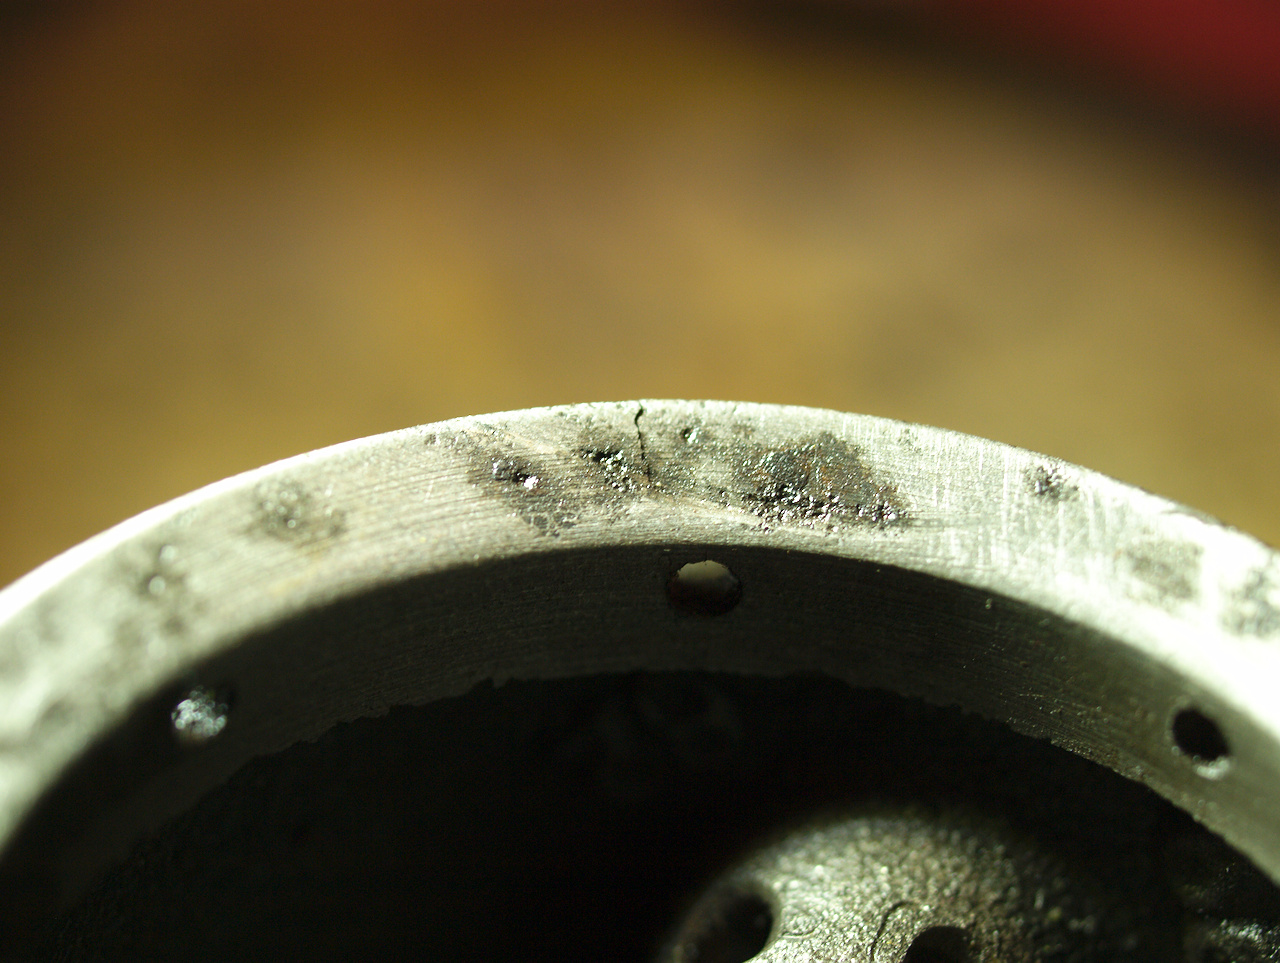 Close up of the underside of the piston's skirt, showing a
semicircular impact mark and a hairline crack in the cast iron
piston.